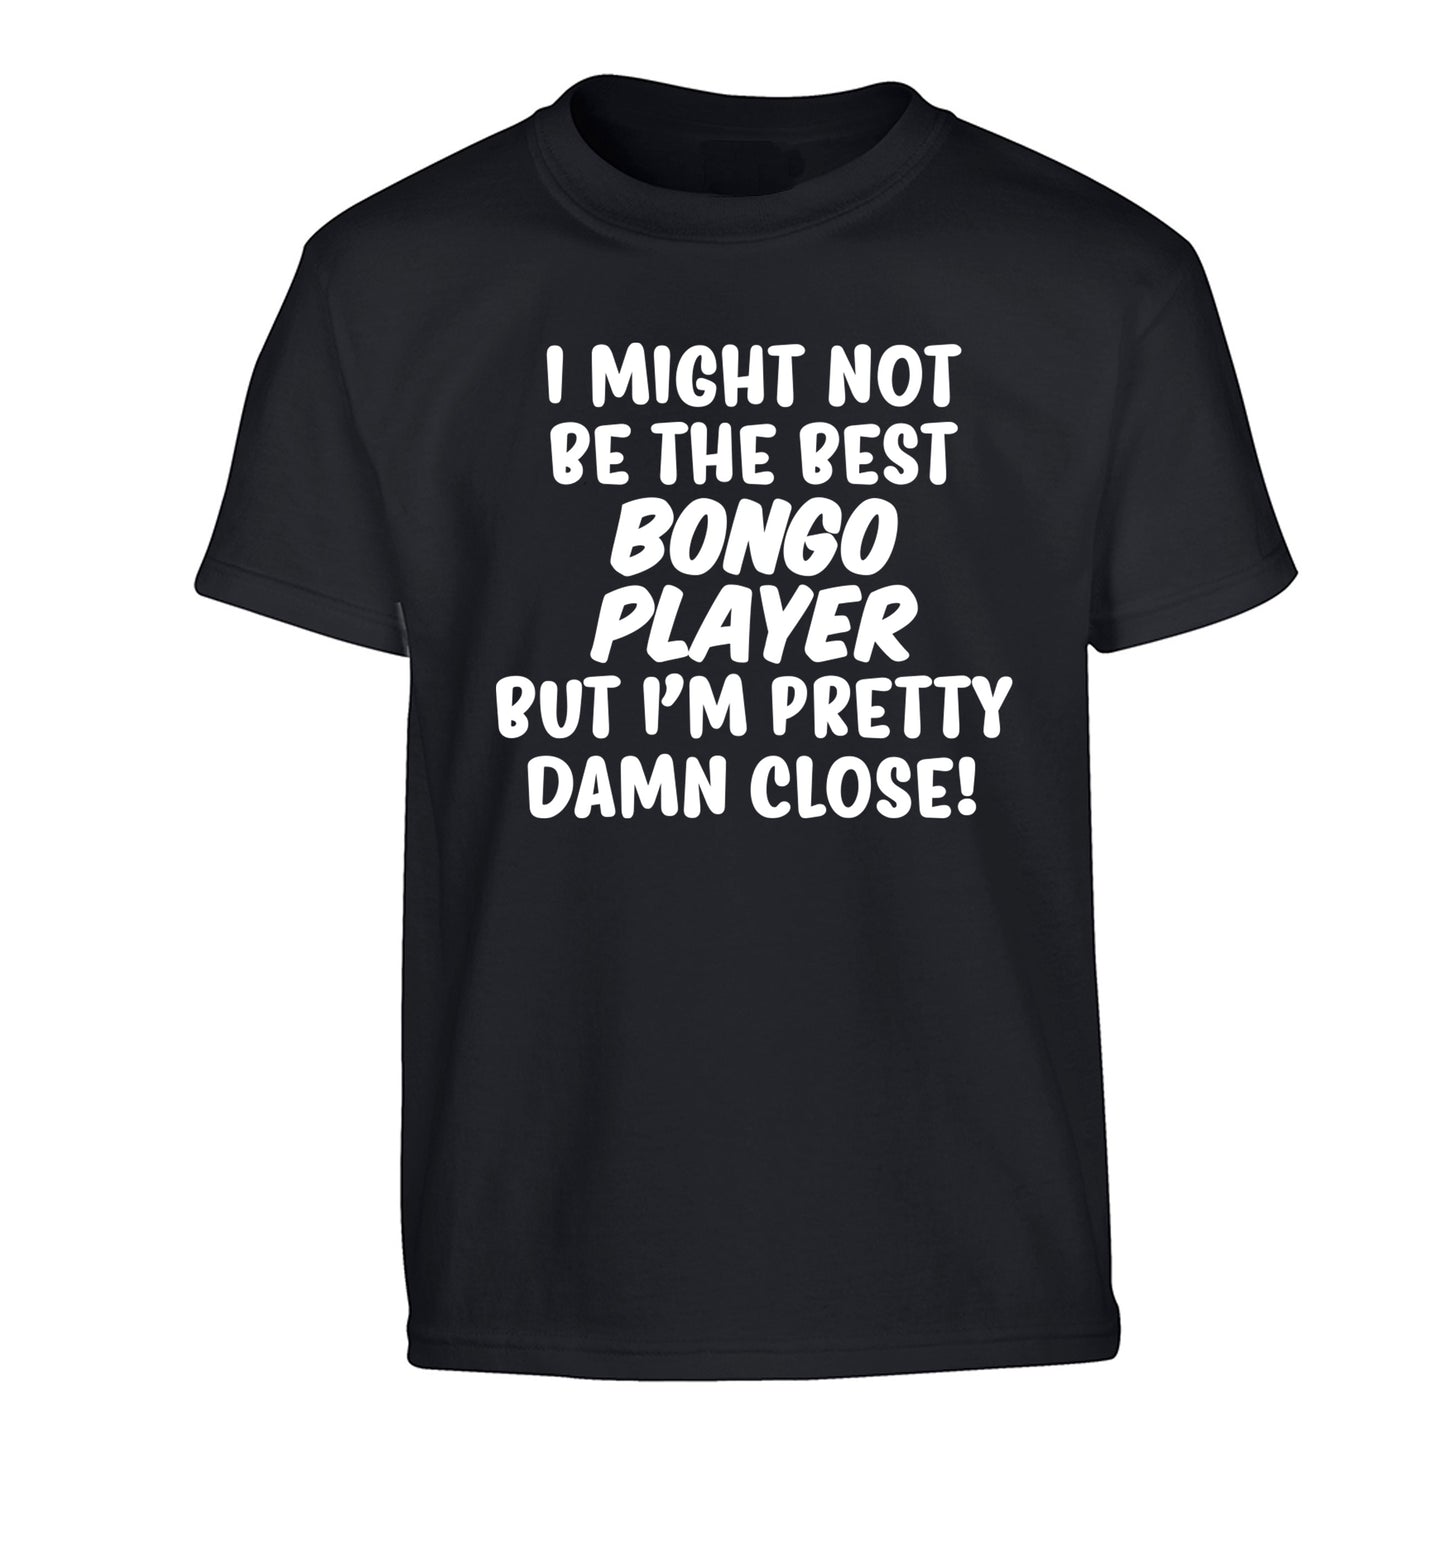 I might not be the best bongo player but I'm pretty close! Children's black Tshirt 12-14 Years